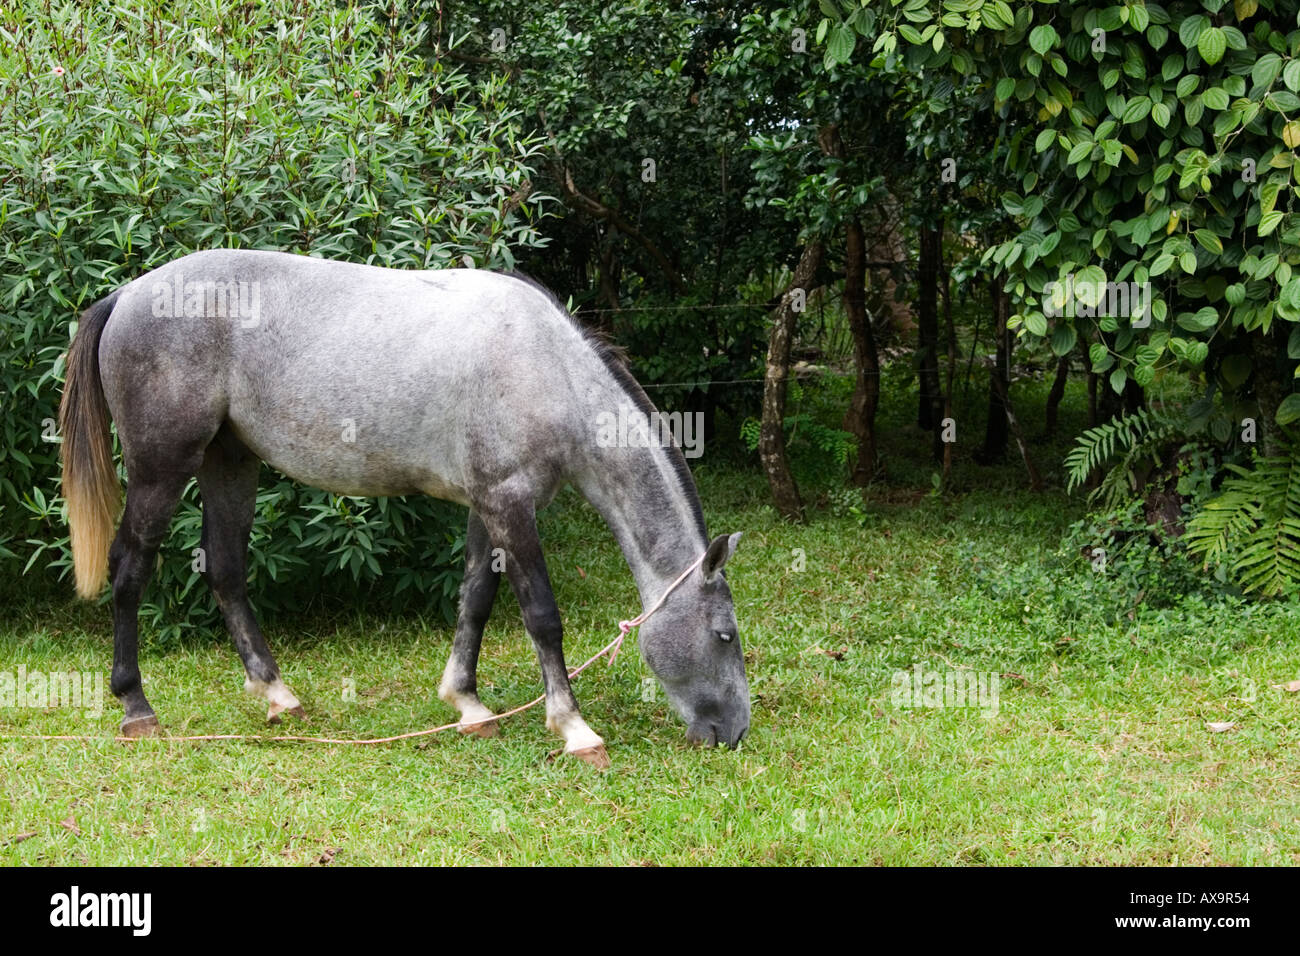 Domestic horse eating grass Stock Photo